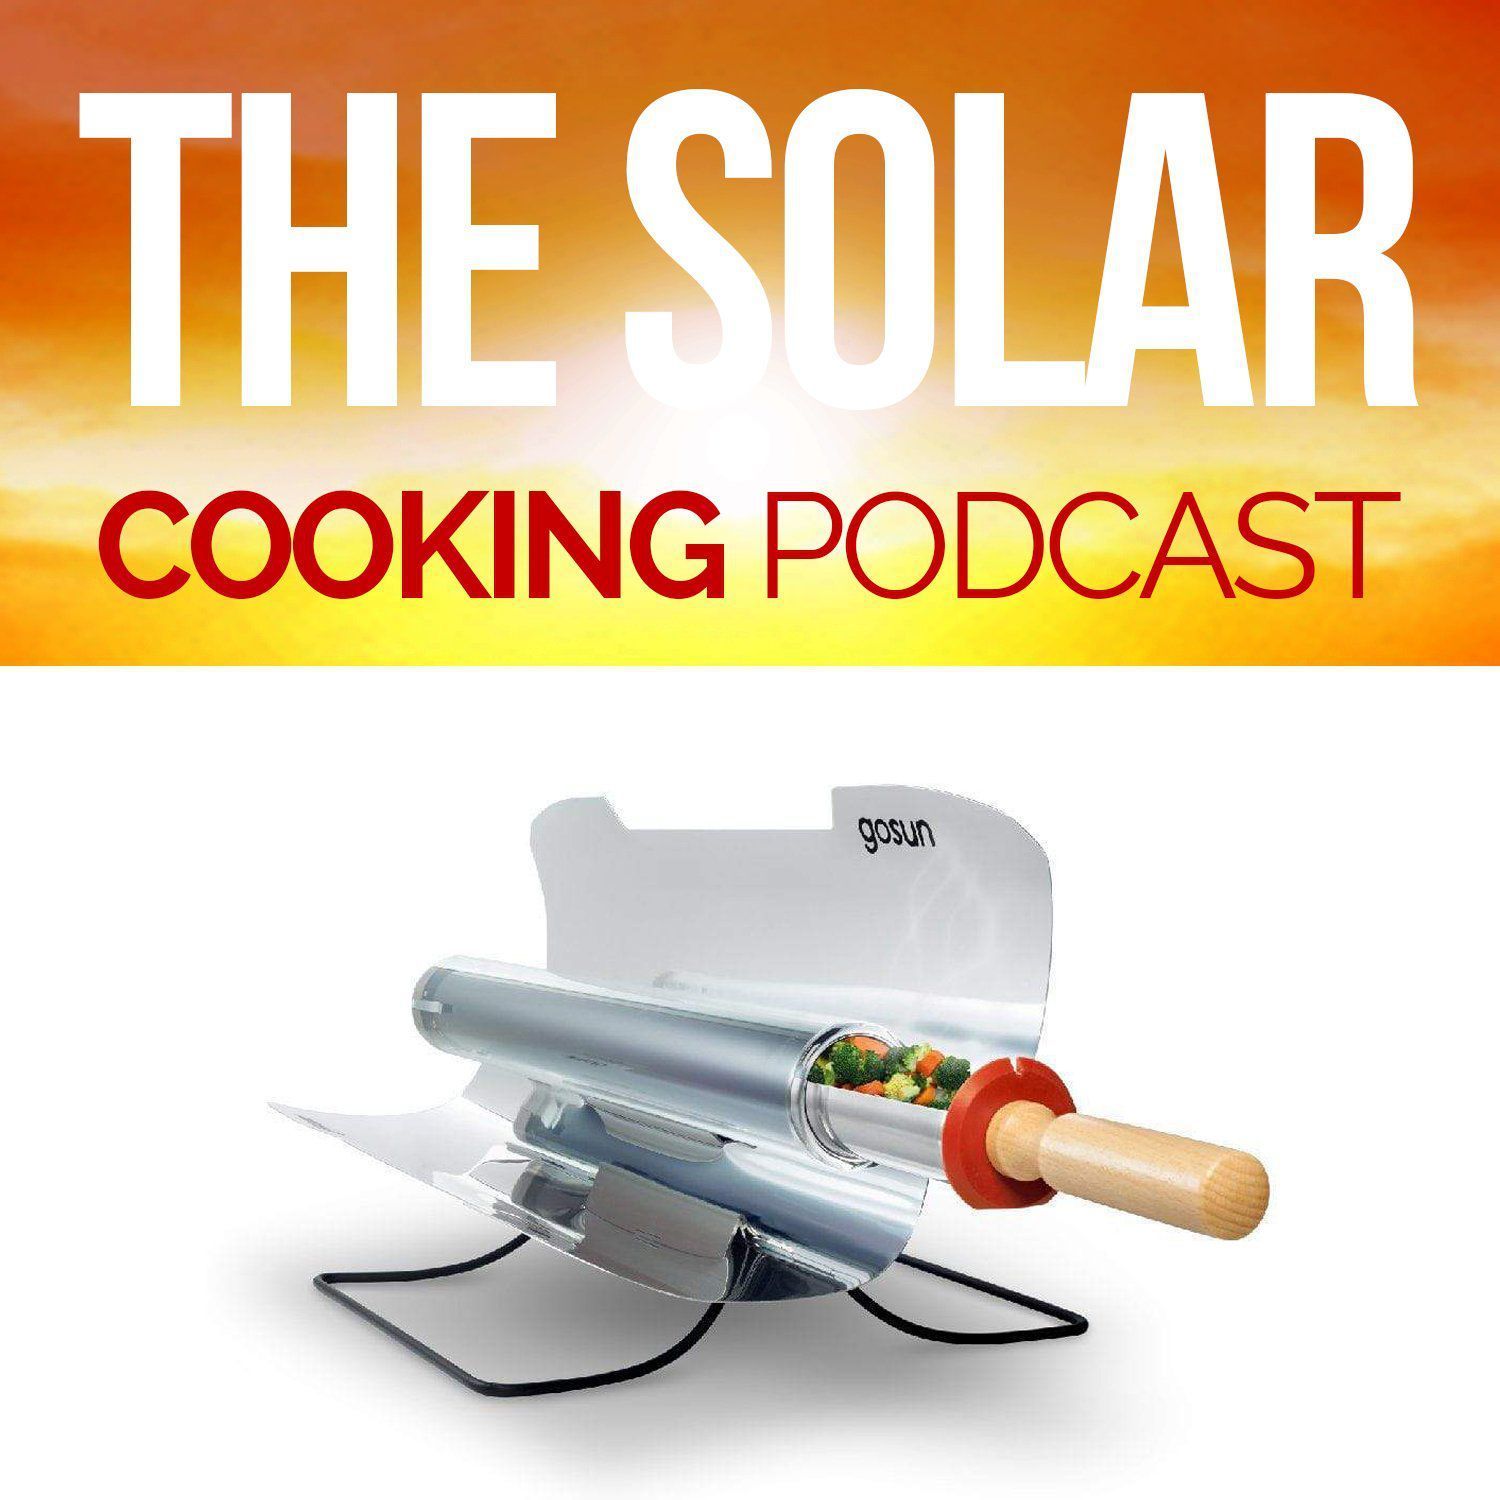 S1 Ep7: The Health Benefits of Solar Cooking